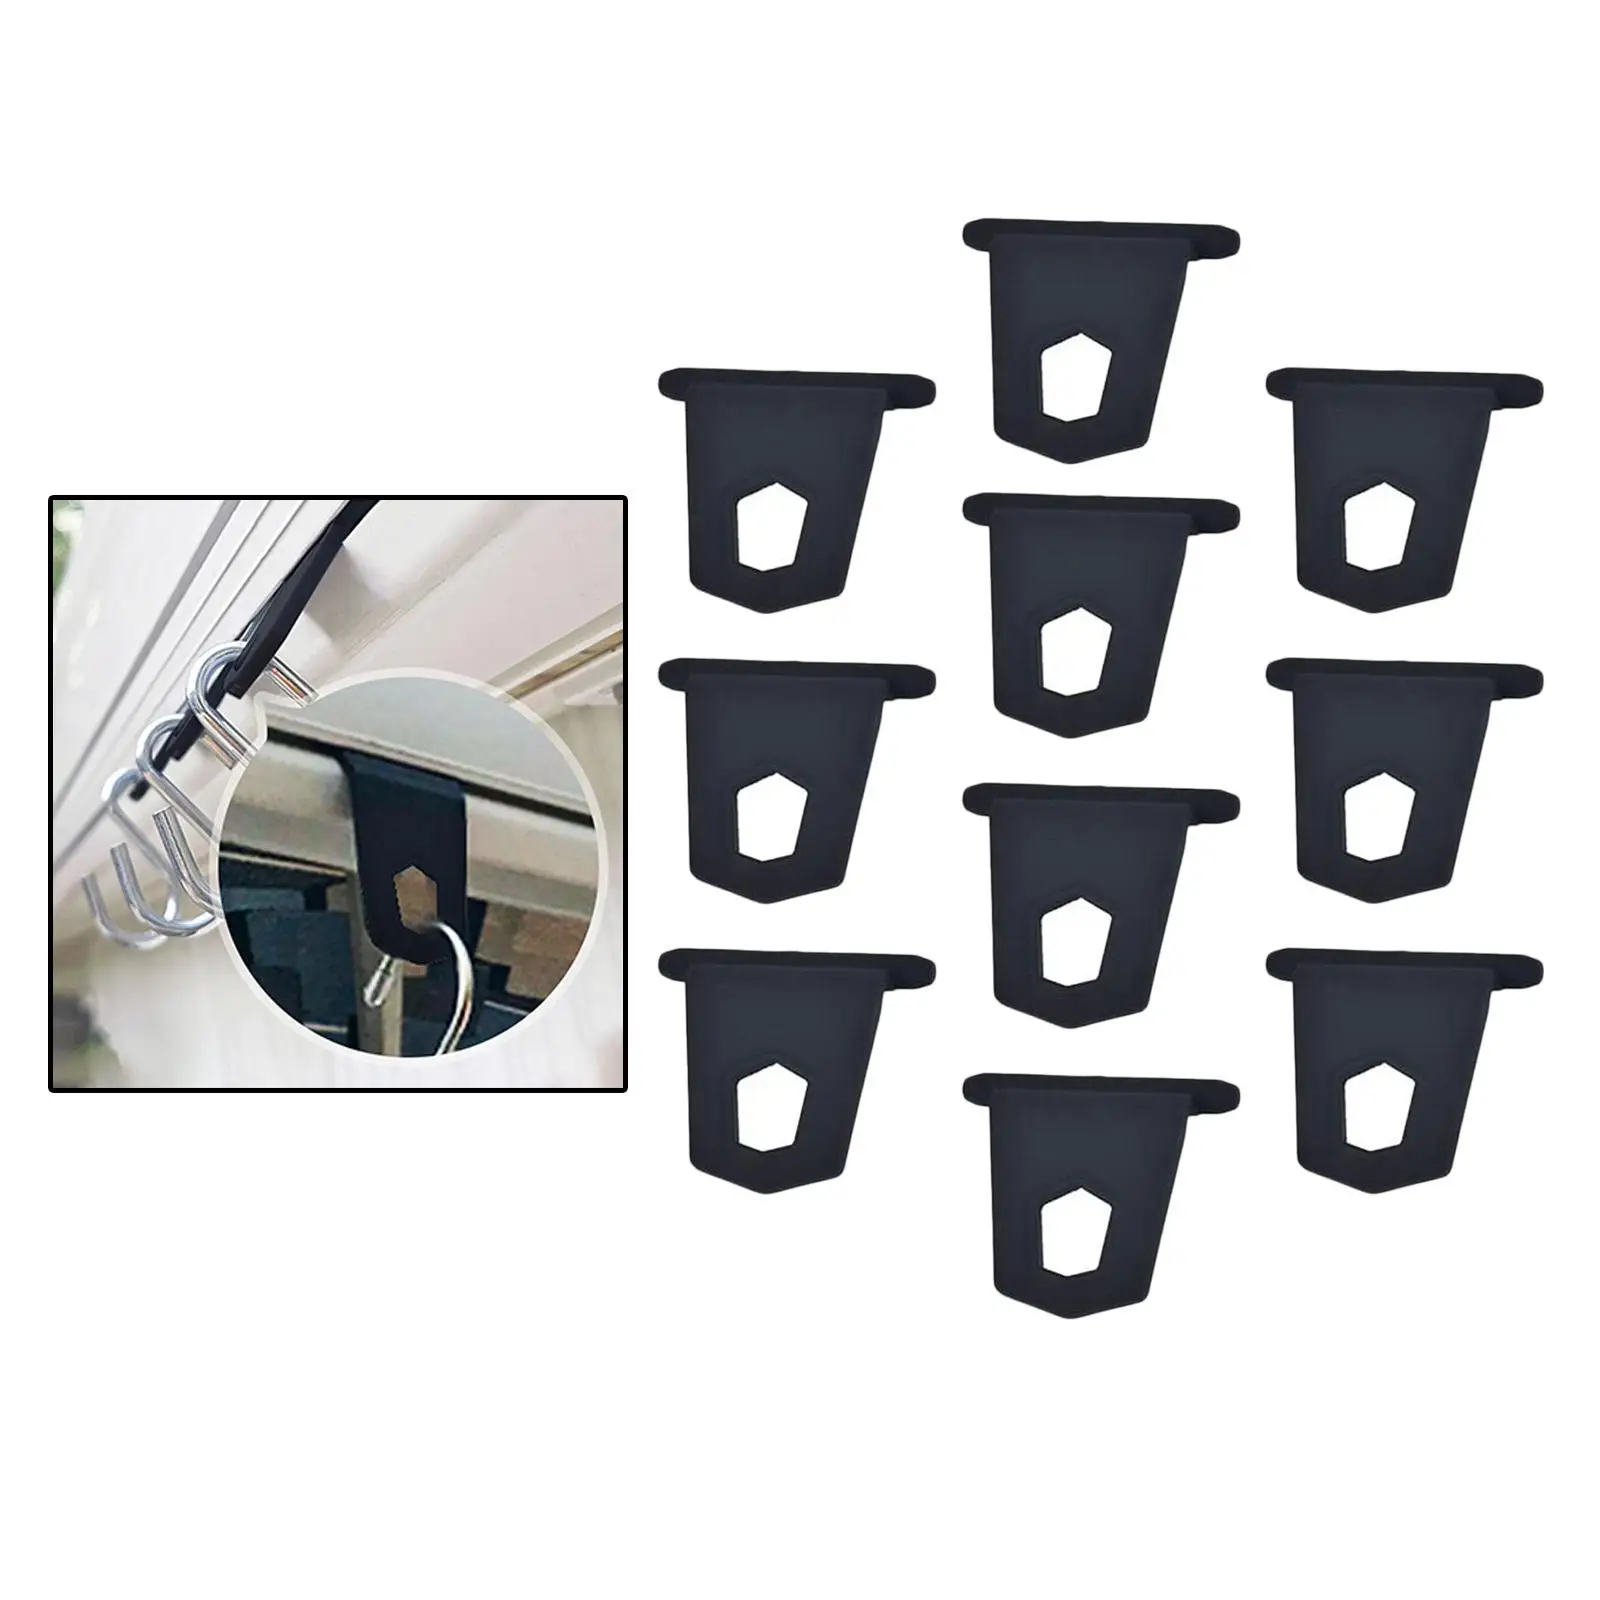 Awning Hangers 10Pcs for Awning Party Light Holders